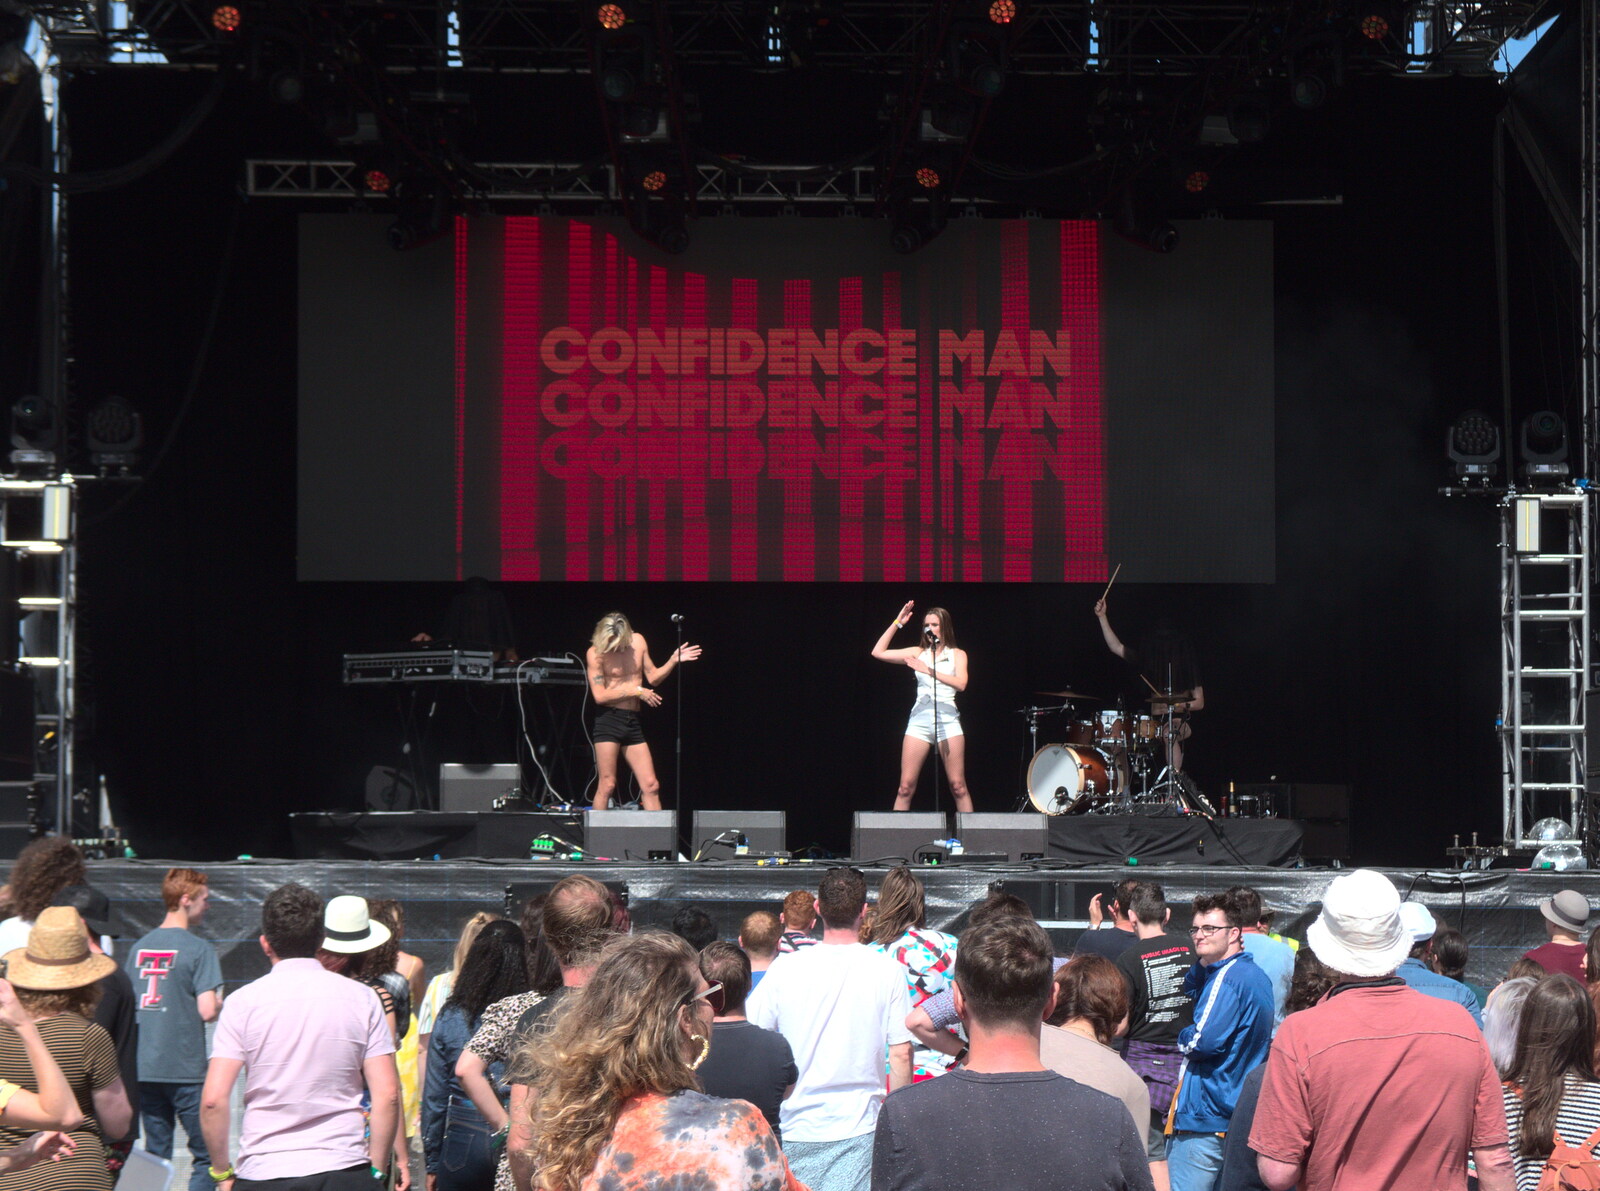 Confidence Man are doing a work-out routine from Beatyard Festival, Dún Laoghaire, County Dublin, Ireland - 5th August 2018